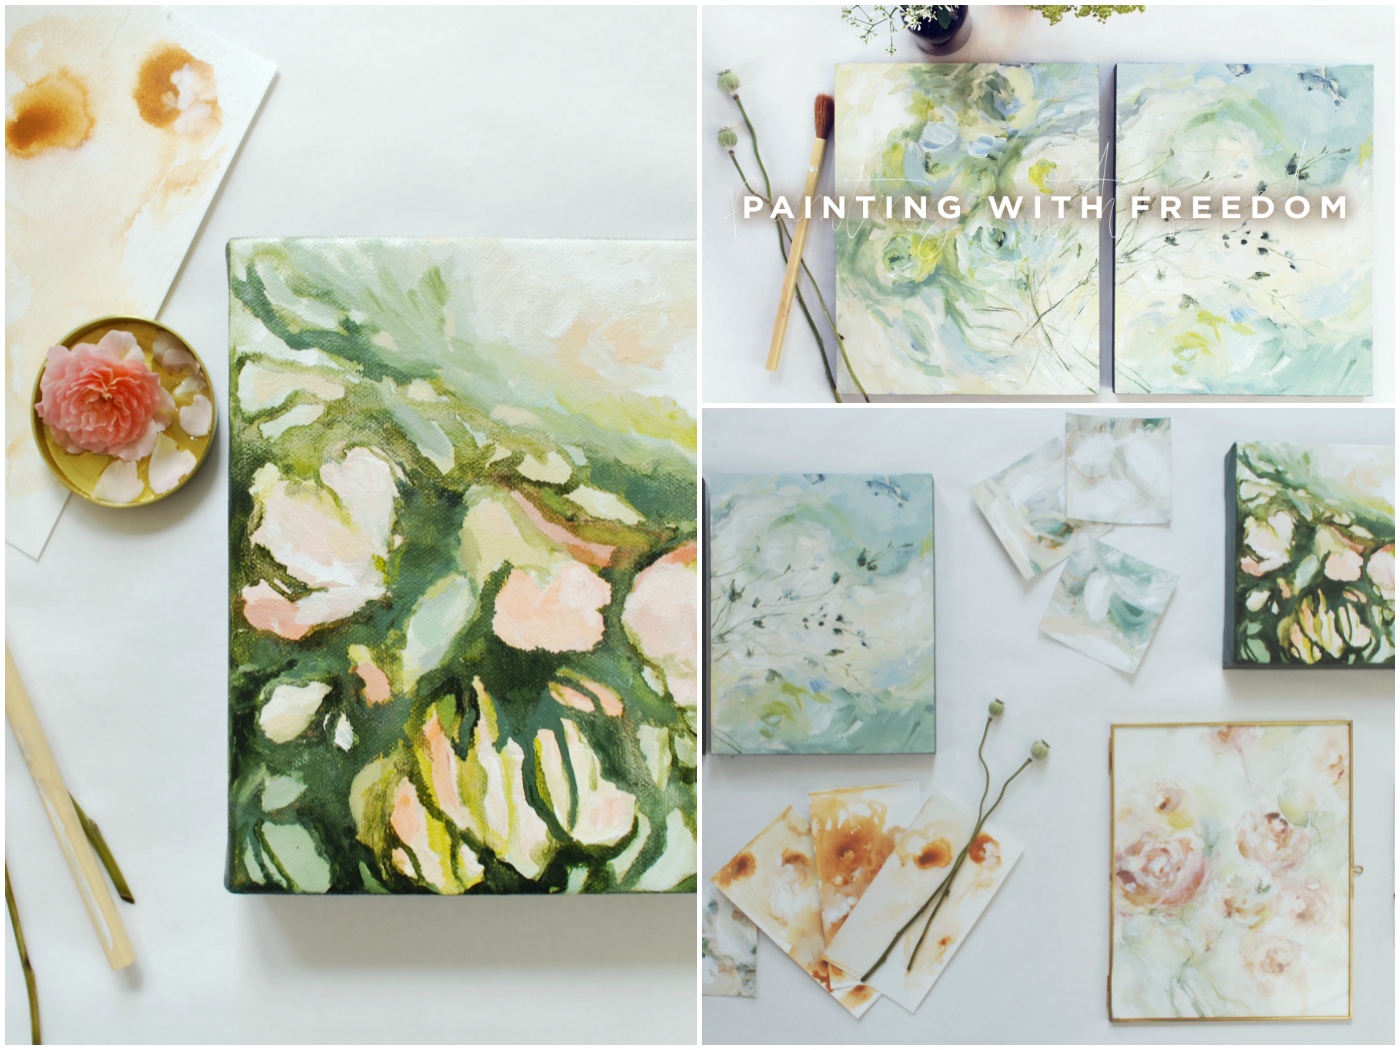 Instant Access on Friday | Painting with Freedom with Melissa Fink